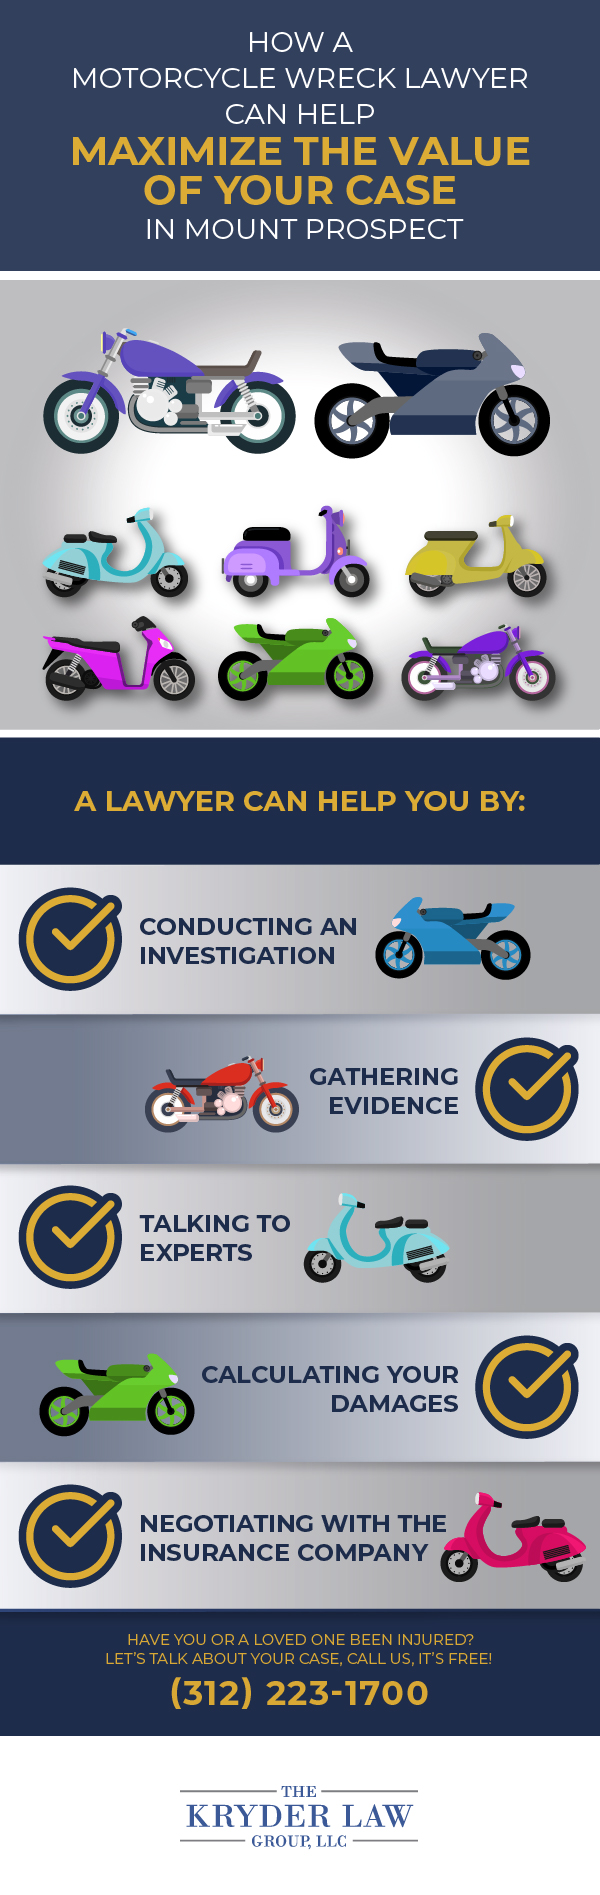 How a Motorcycle Wreck Lawyer Can Help Maximize the Value of Your Case in Mount Prospect Infographic